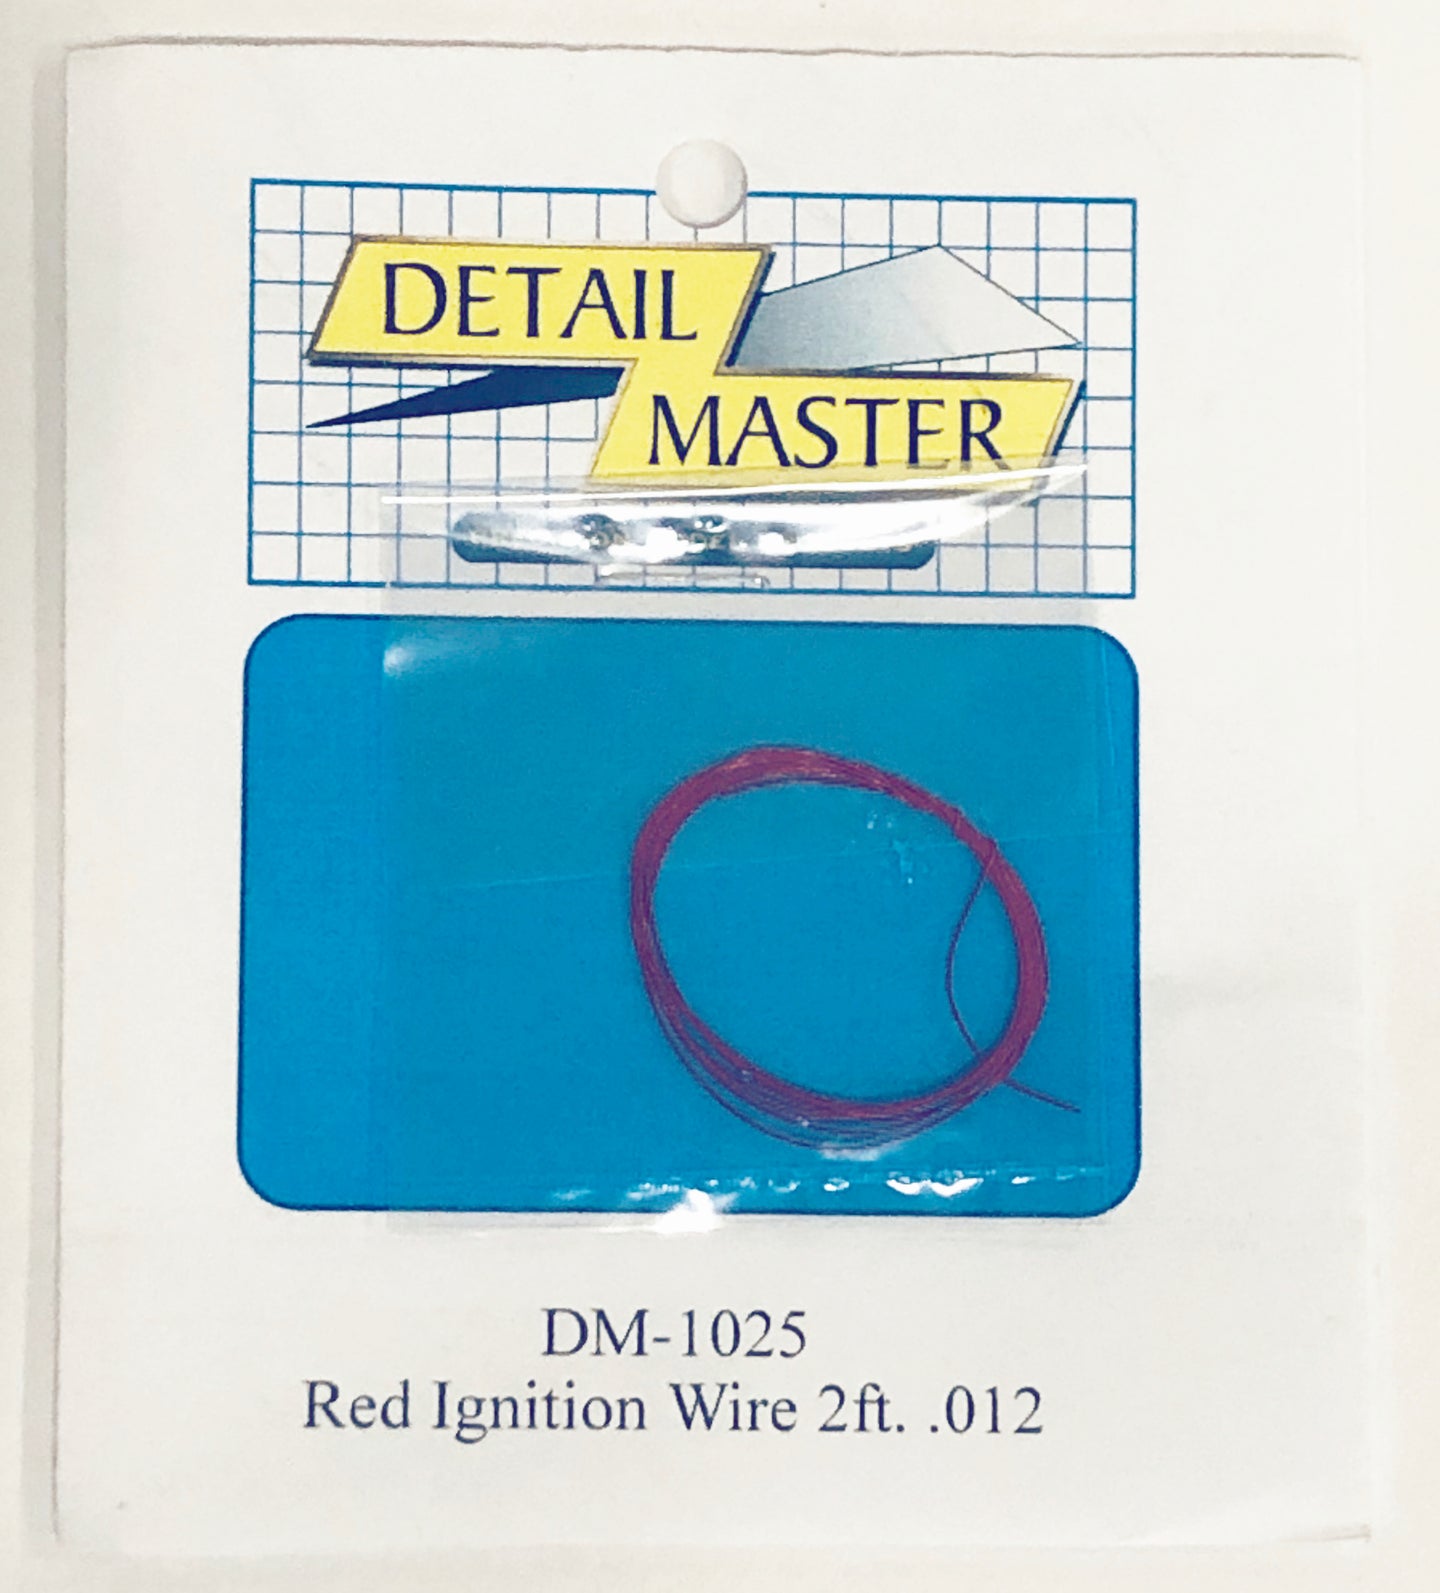 Detail Master 1/24 - 1/25 Ignition Wire Red 2ft DM-1025